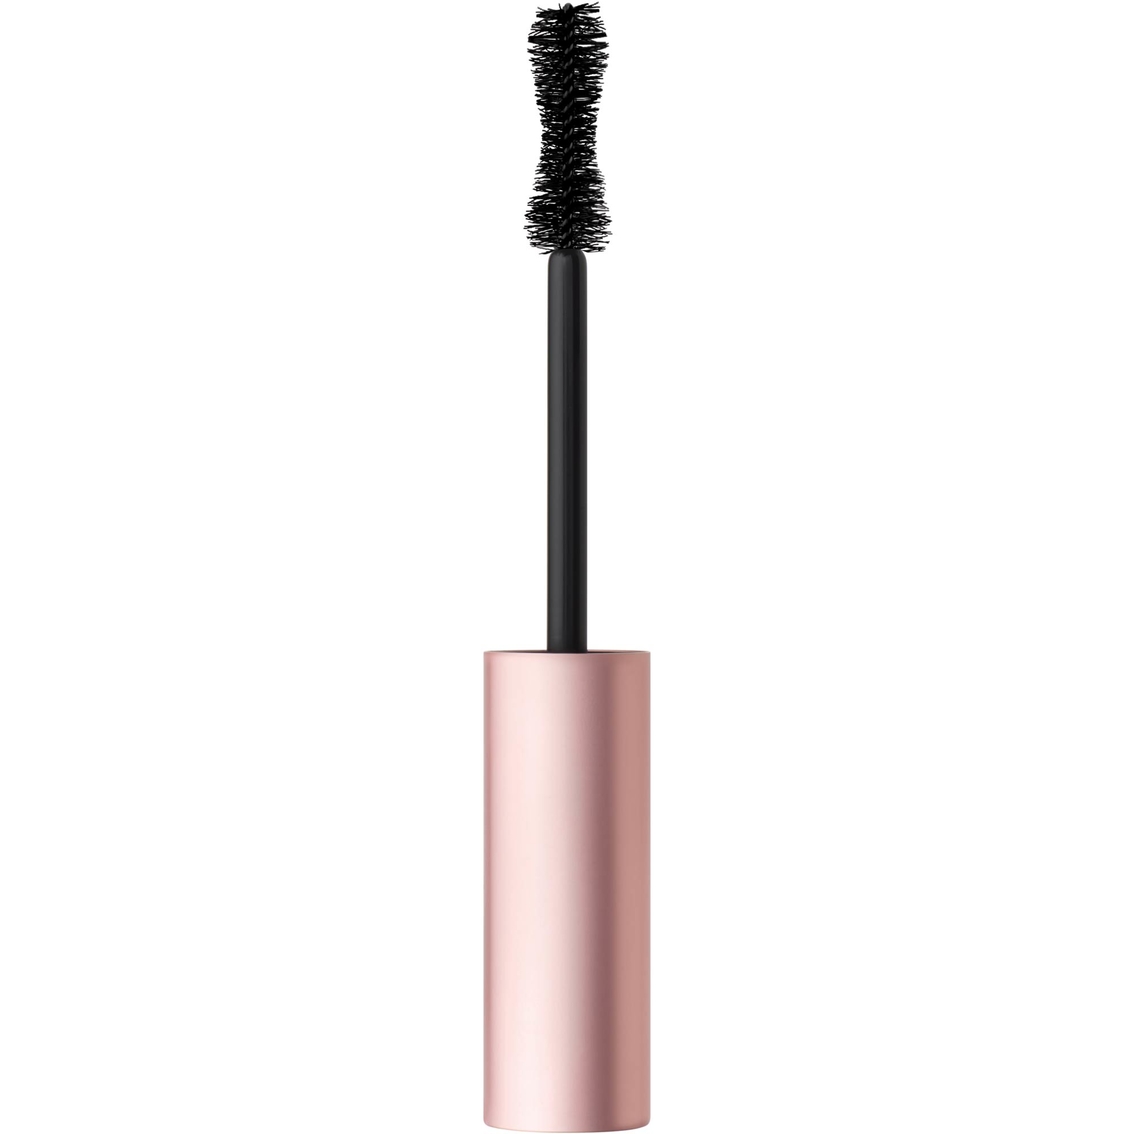 Too Faced Better Than Sex Mascara - Image 4 of 6